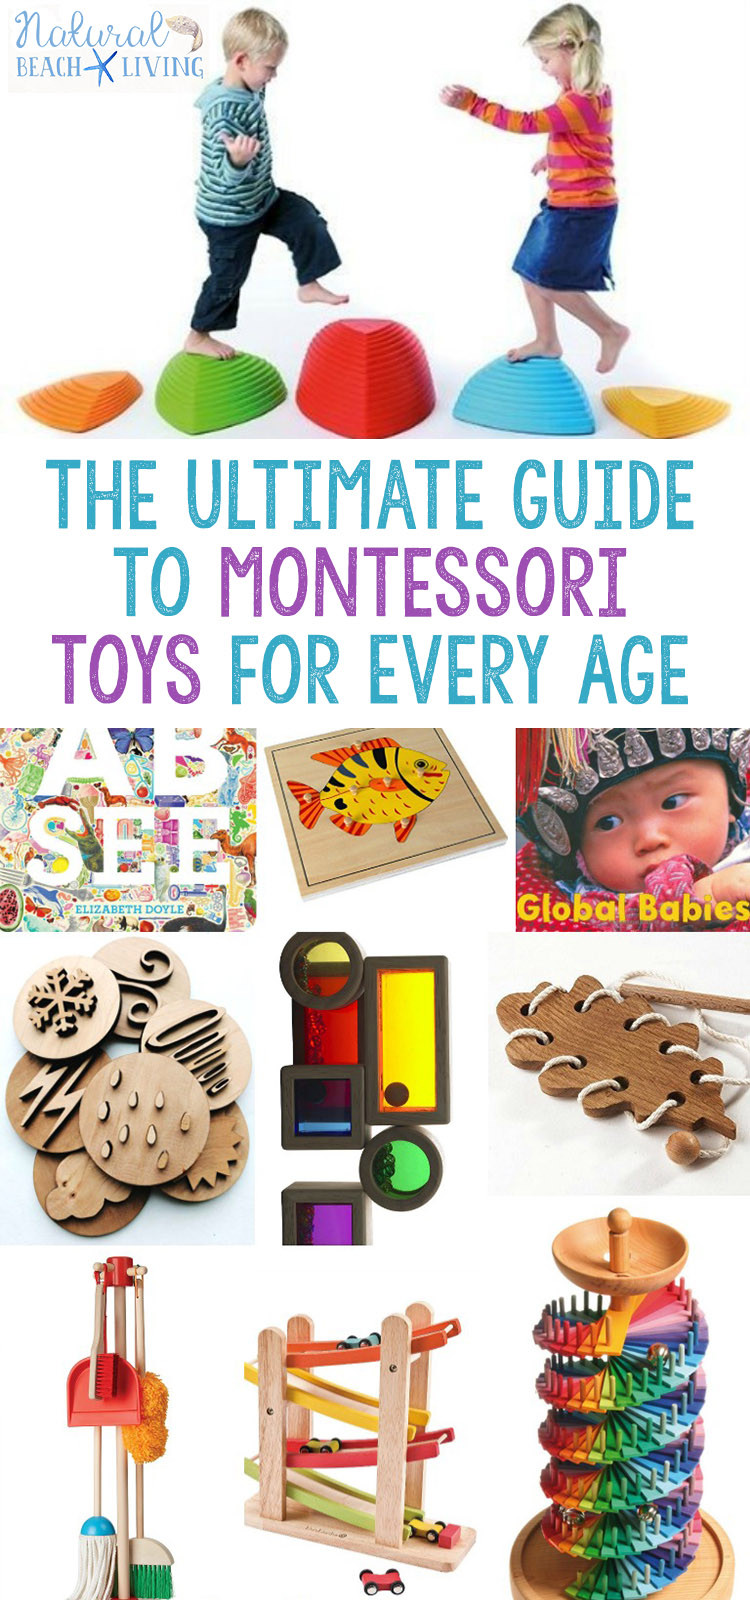 Girls Gift Ideas Age 5
 The Best Montessori Toys for 5 Year Olds Natural Beach